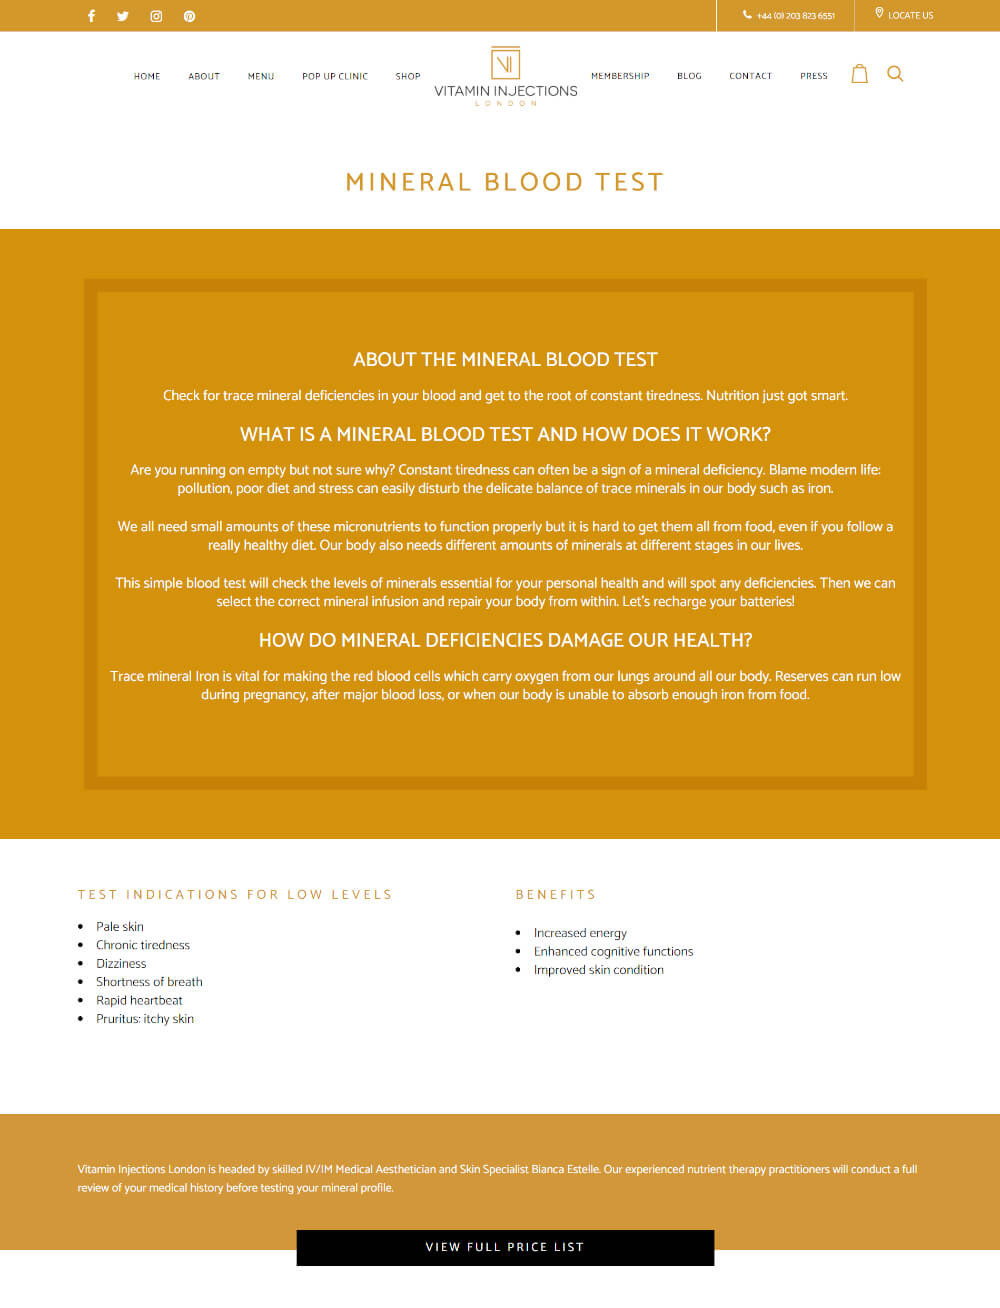 A screenshot of a Vitamin Injections treatment page - Mineral blood test